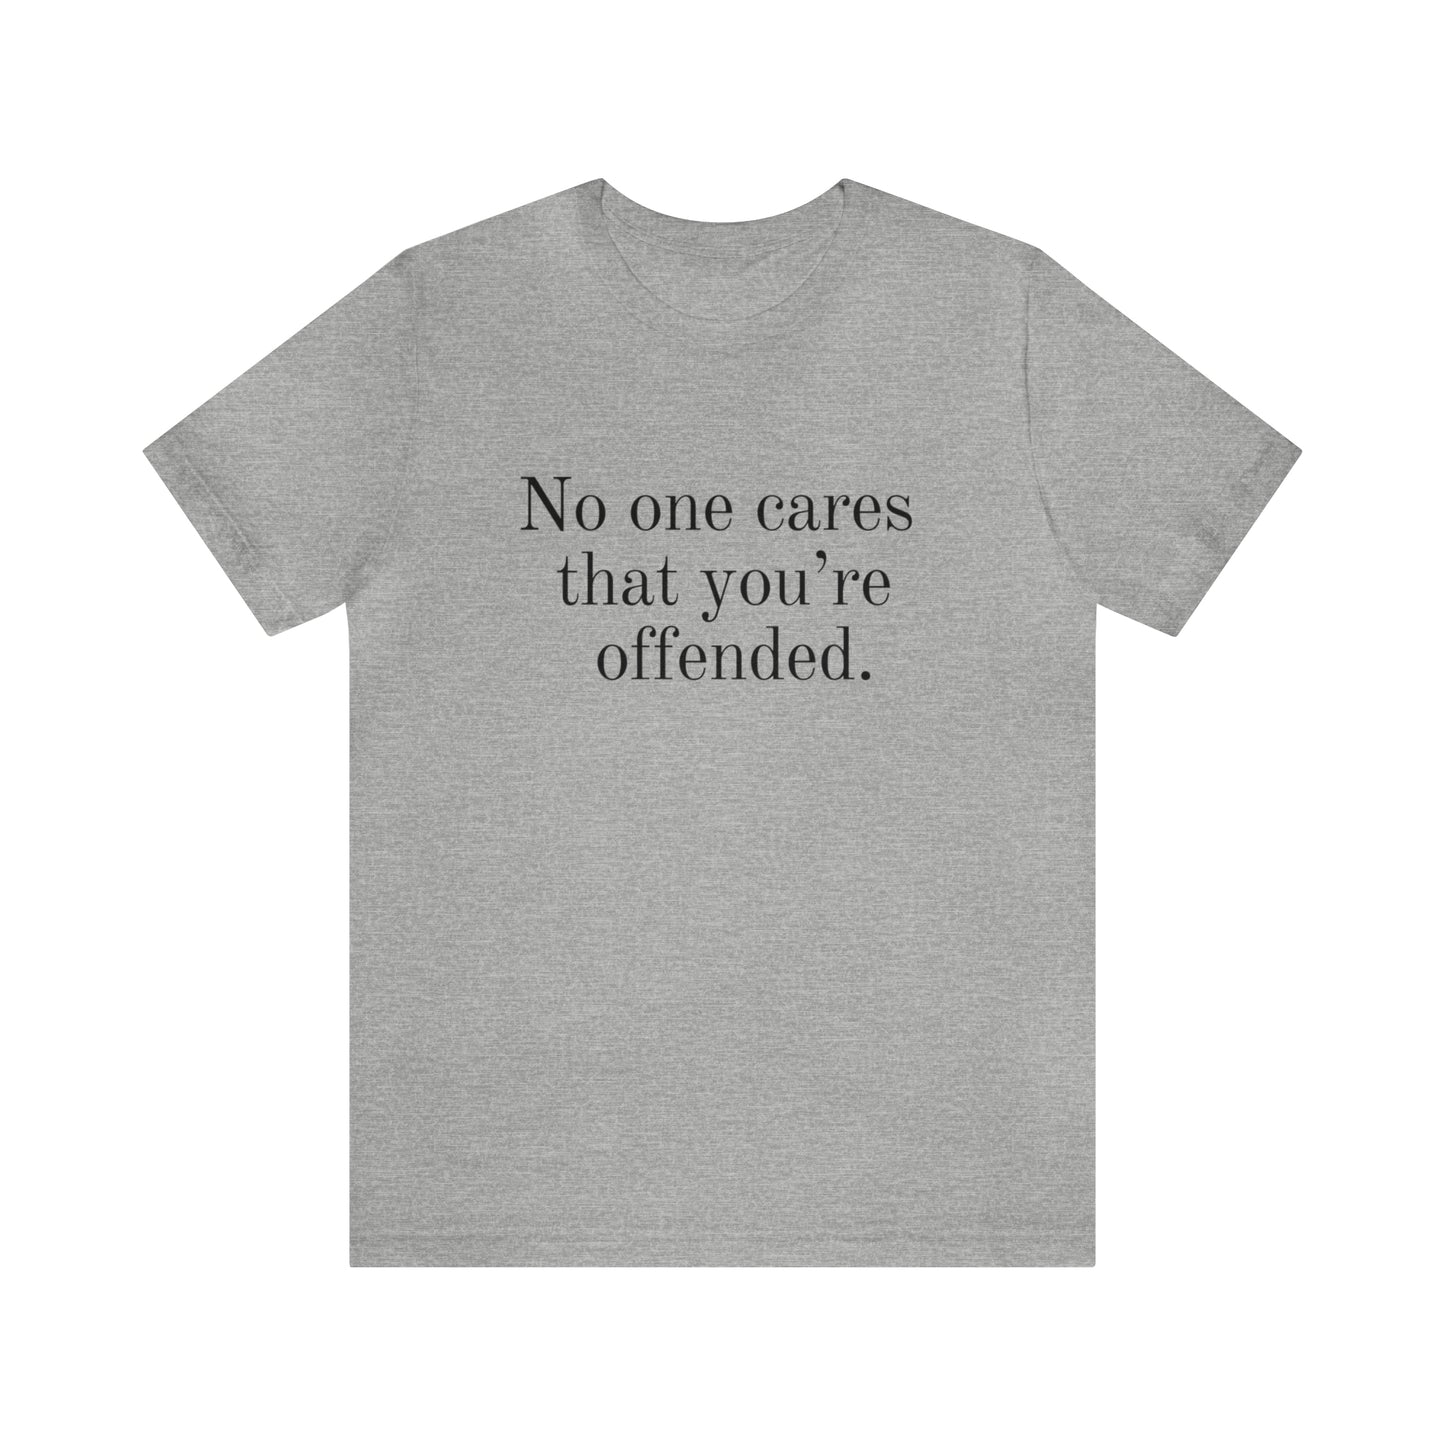 No one cares that you're offended. Unisex Jersey Short Sleeve Tee (t-shirt)